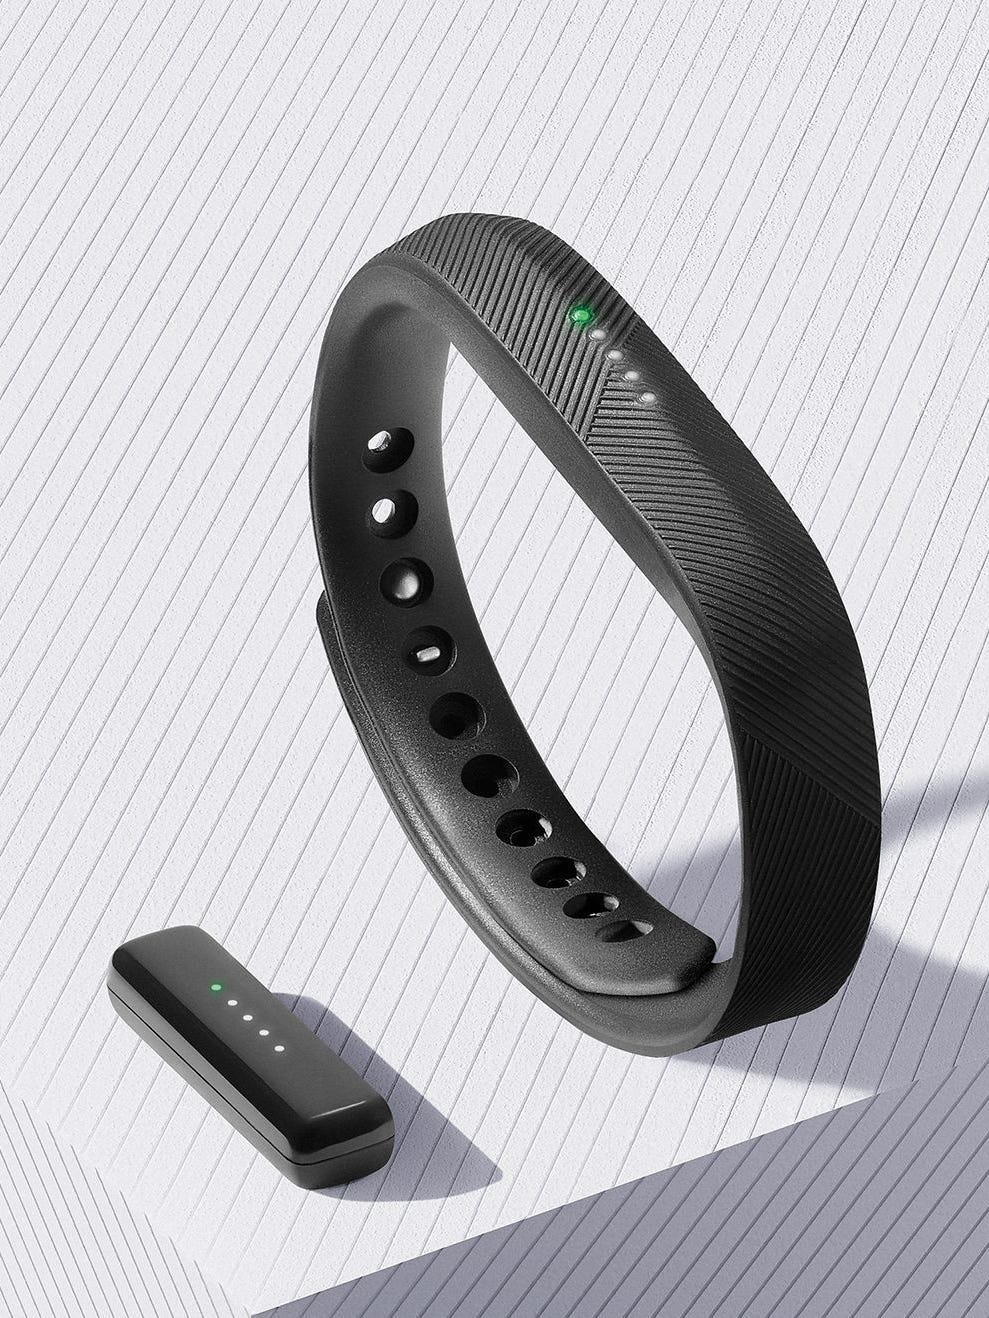 Fitbit says forces' caused the damage to